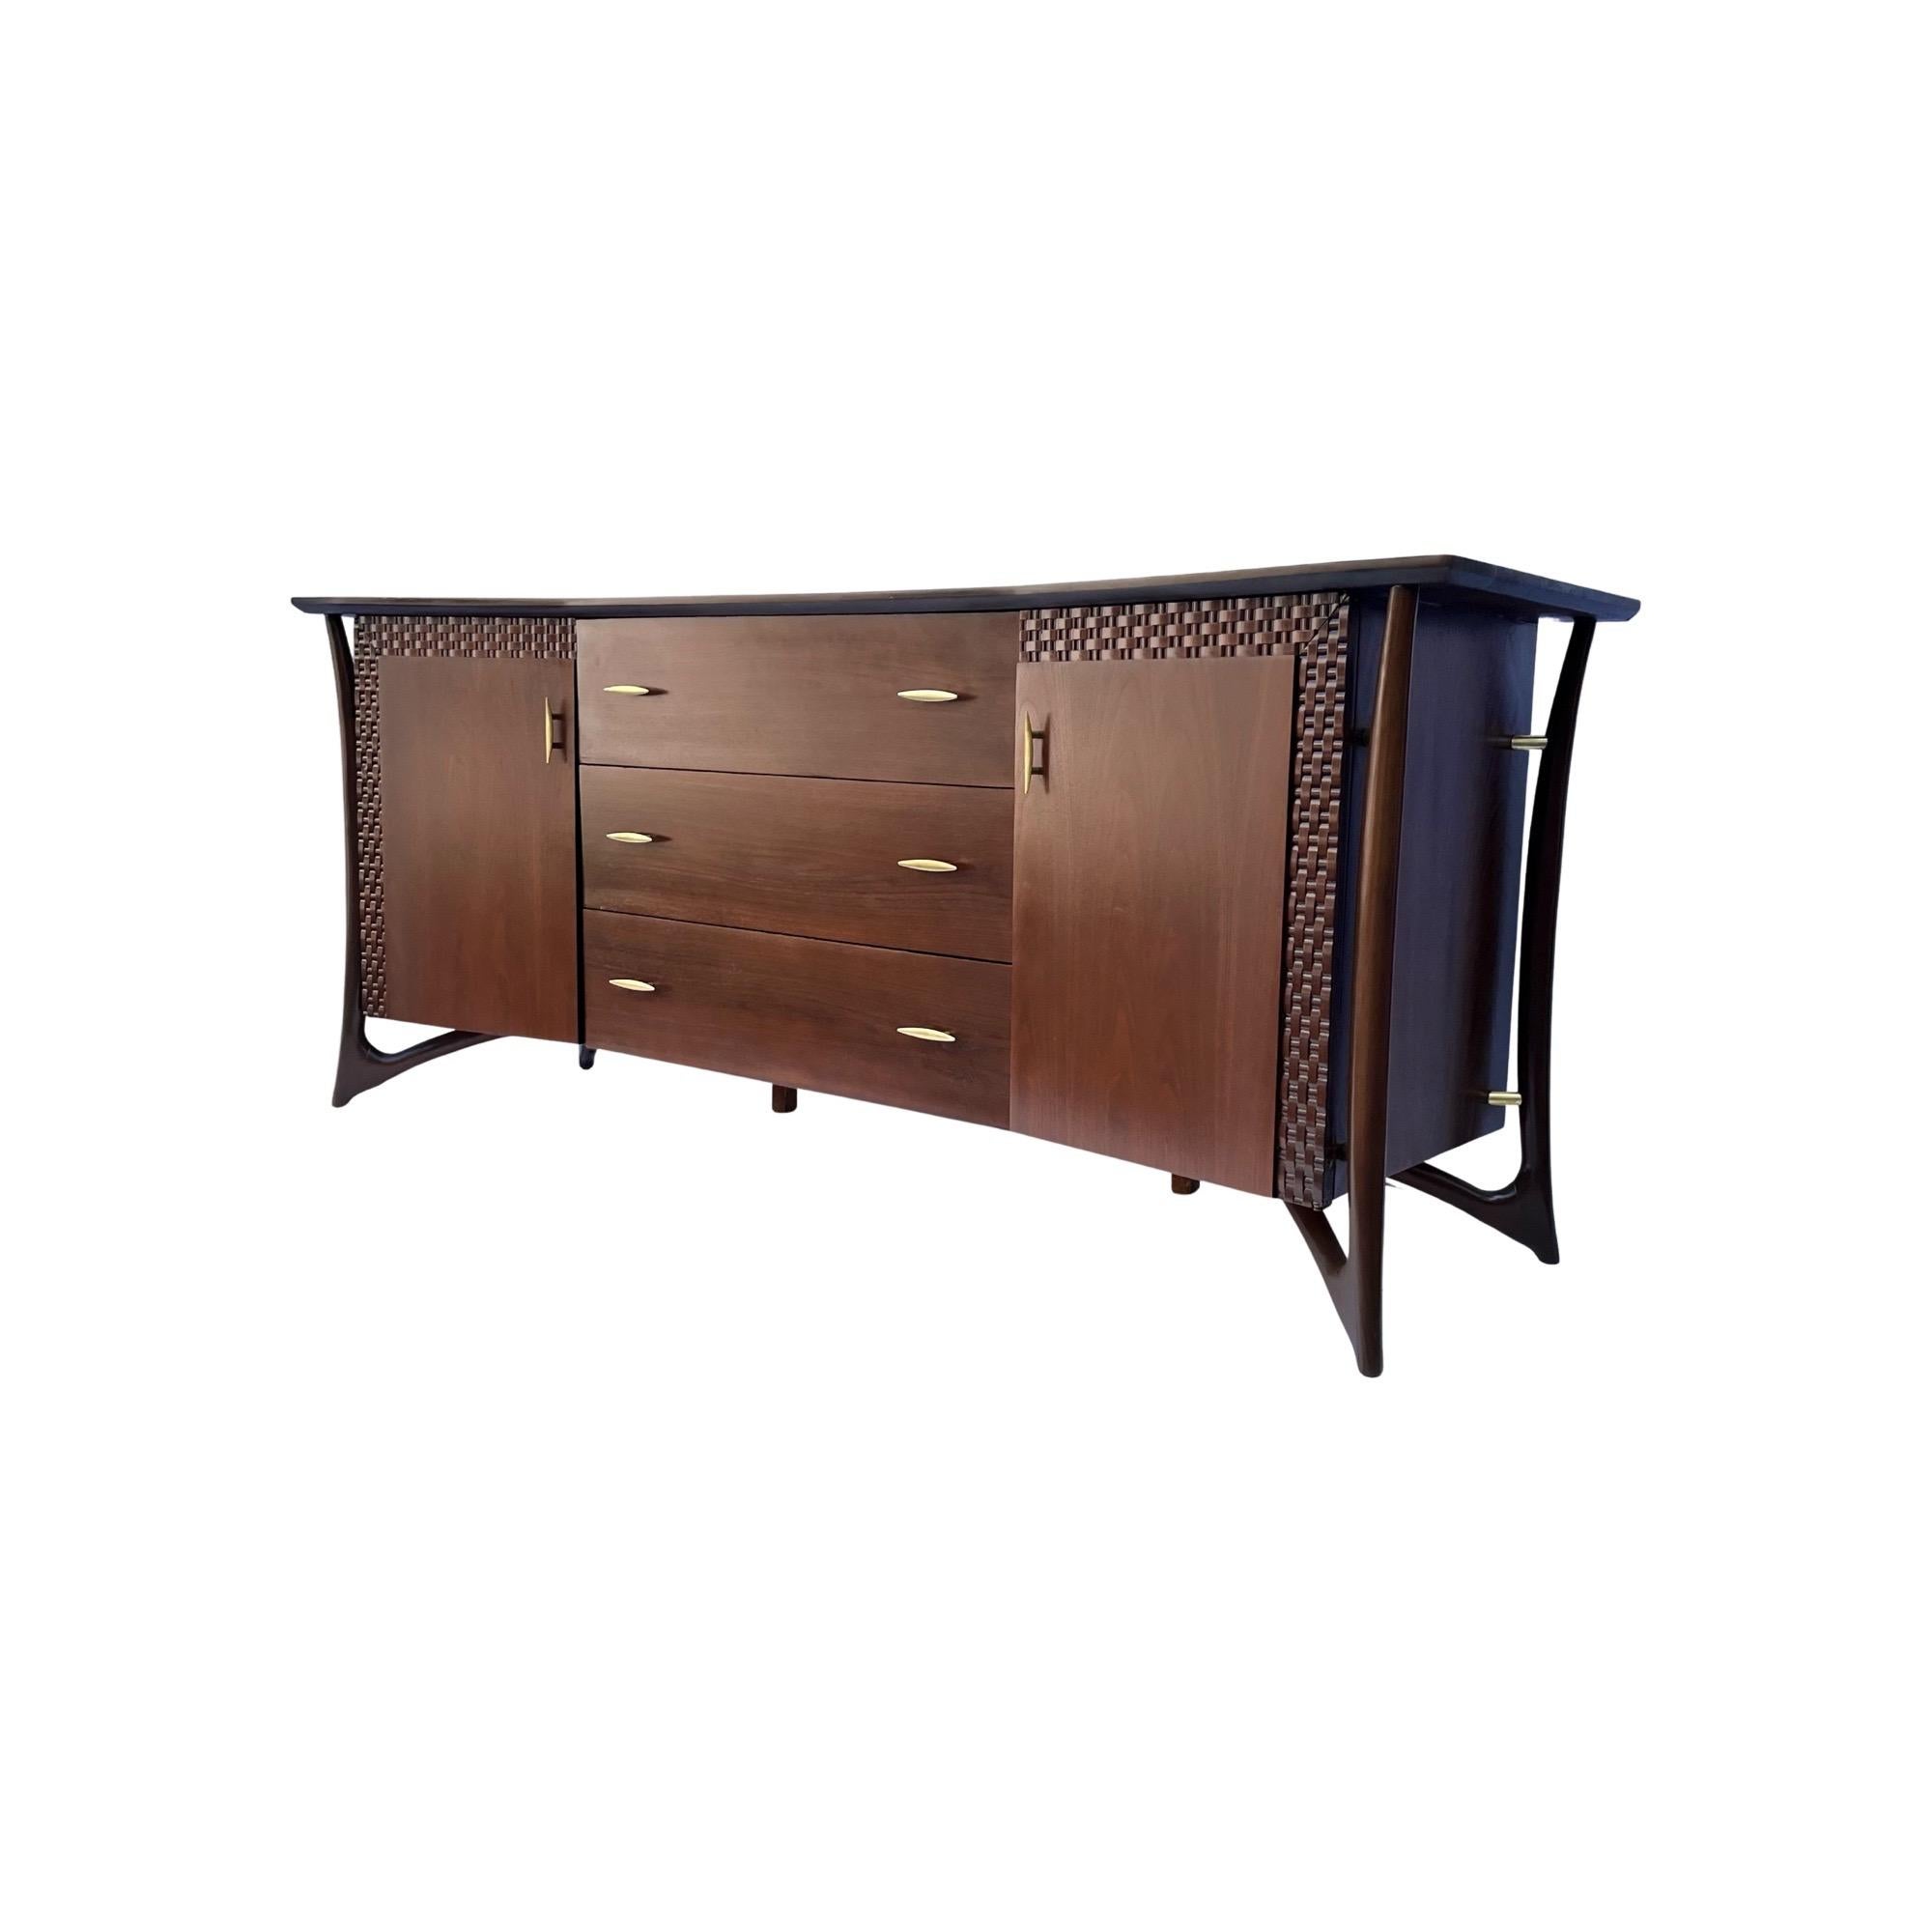 Introducing a captivating piece of furniture from the late 1950s, behold this magnificent walnut and brass dresser by the renowned designer Piet Hein. Crafted with meticulous attention to detail, this sculptural masterpiece showcases hand-formed